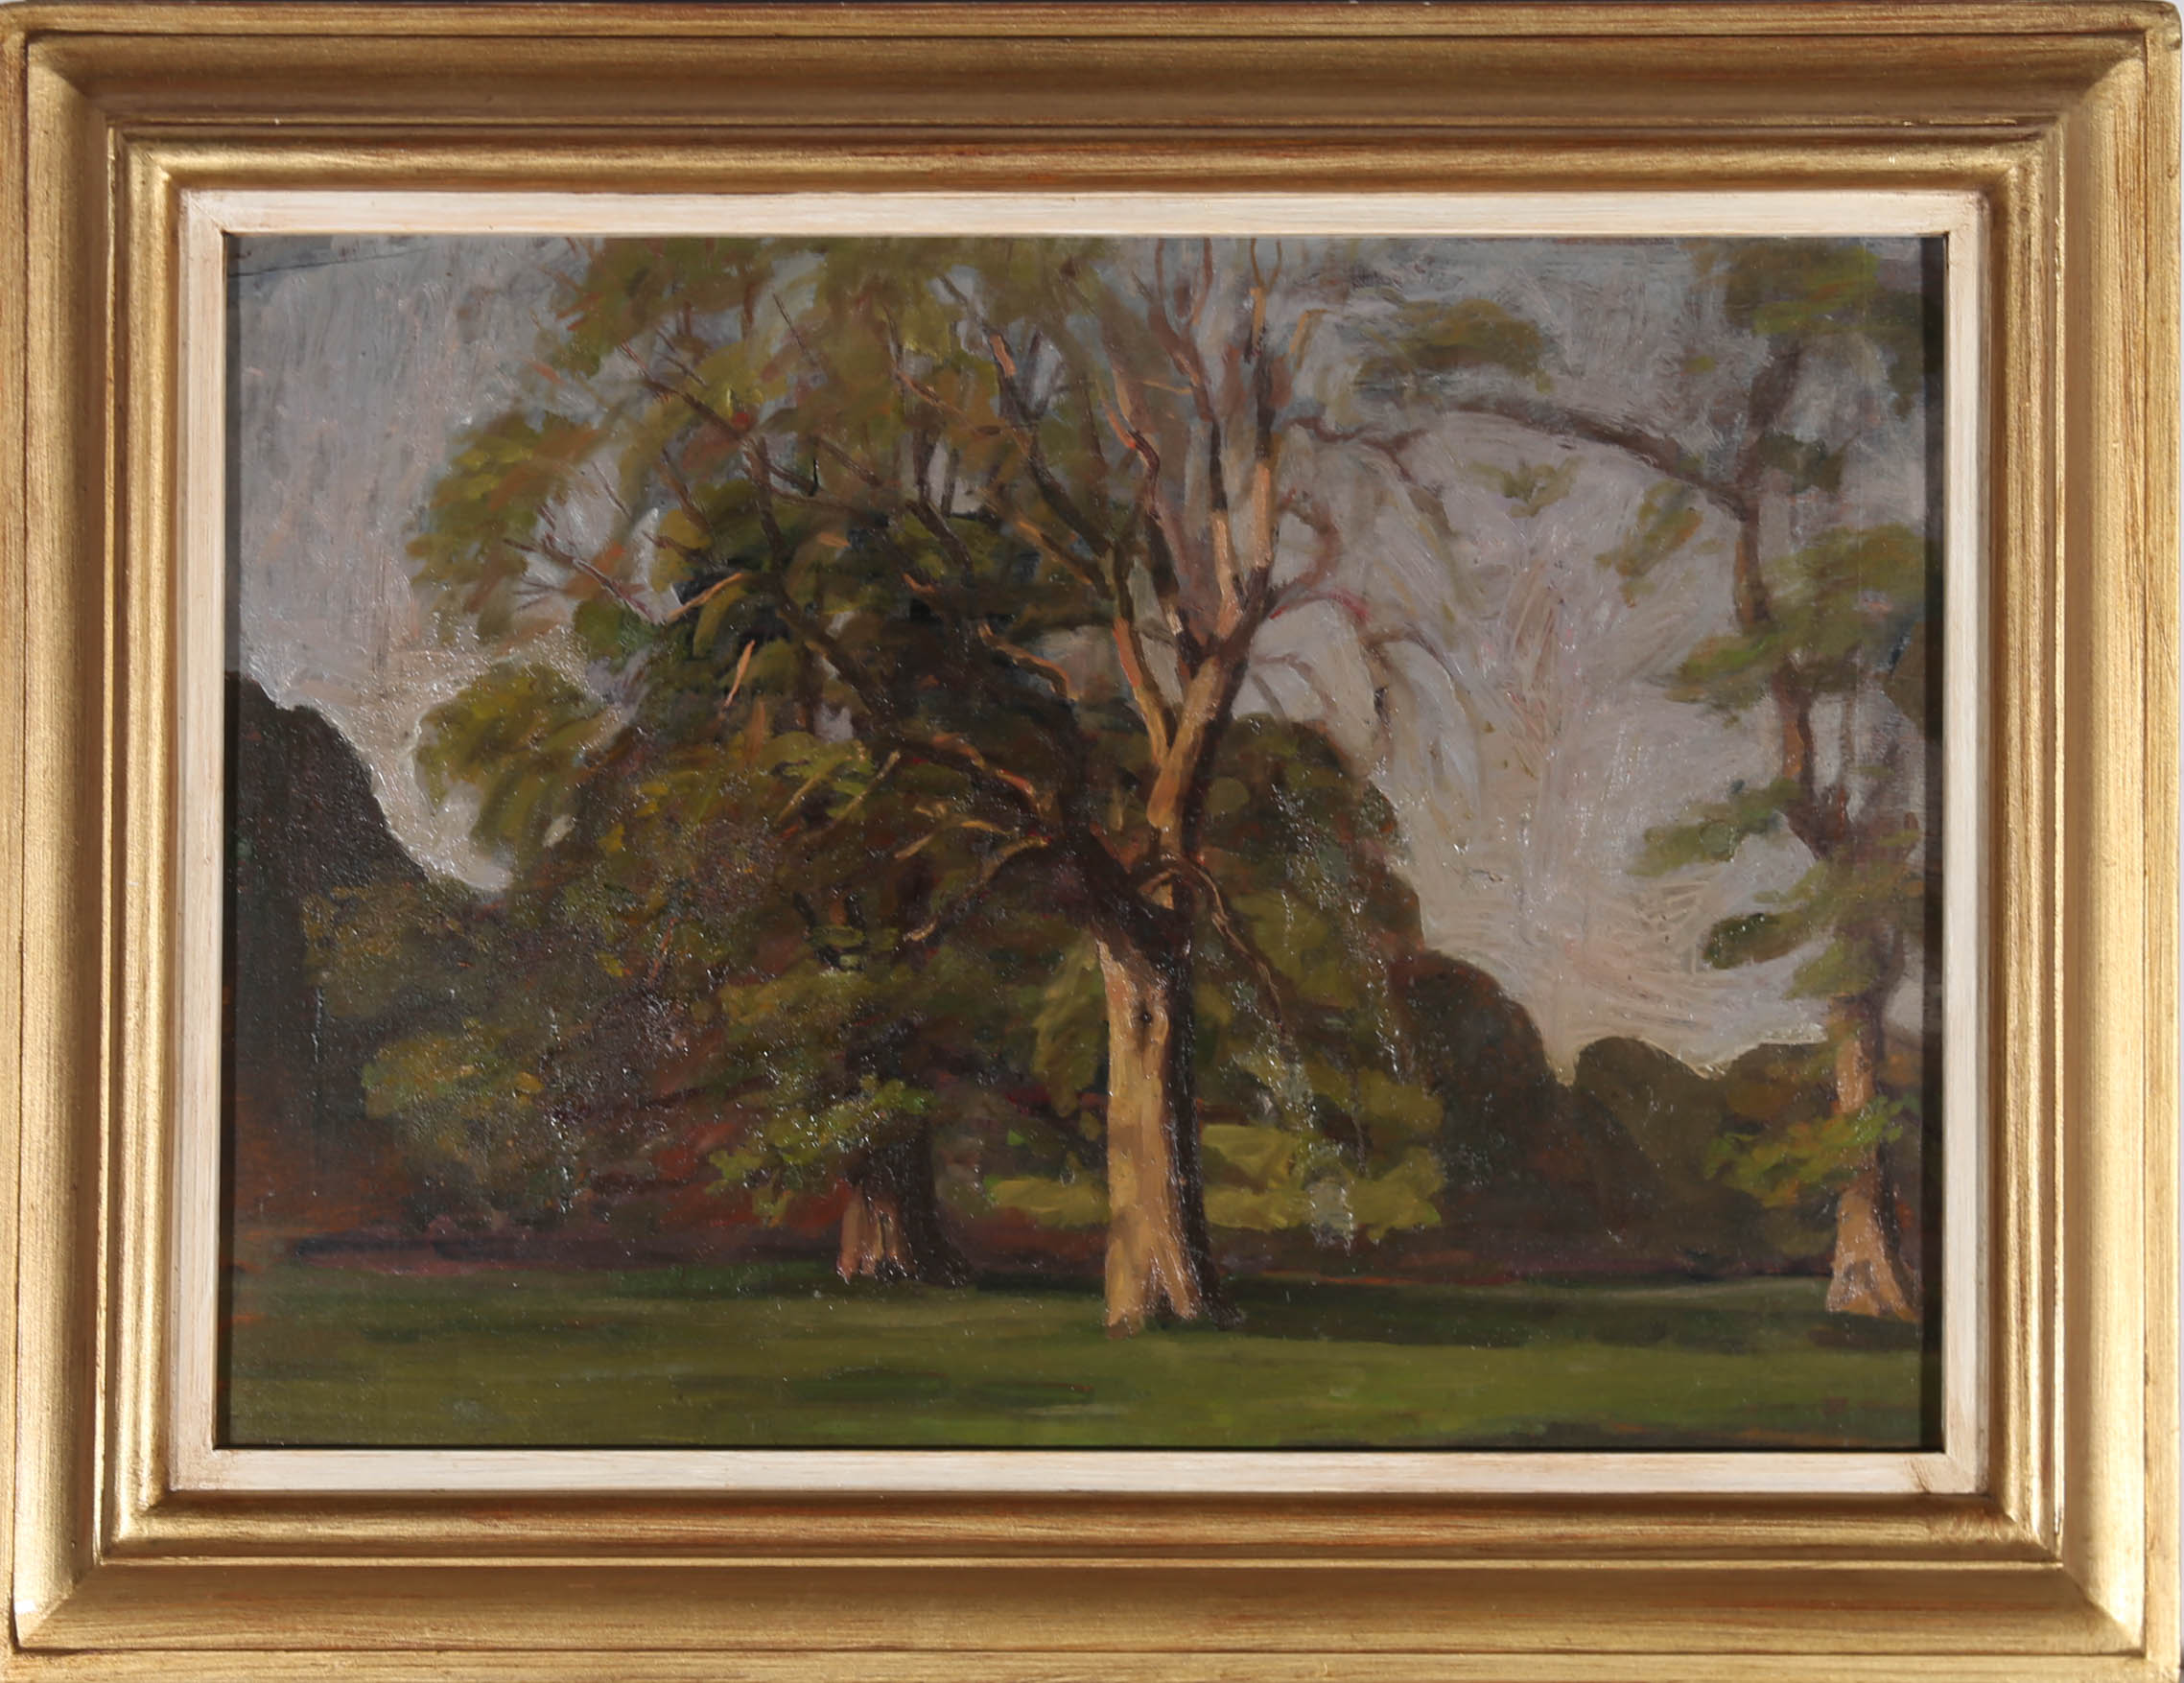 This charming oil study depicts a tranquil park scene in a mid-century style. The artist uses a muted palette and gestural brushwork to create a pleasant scene that is full of movement and depth. Signed with a small monogram to the lower right.